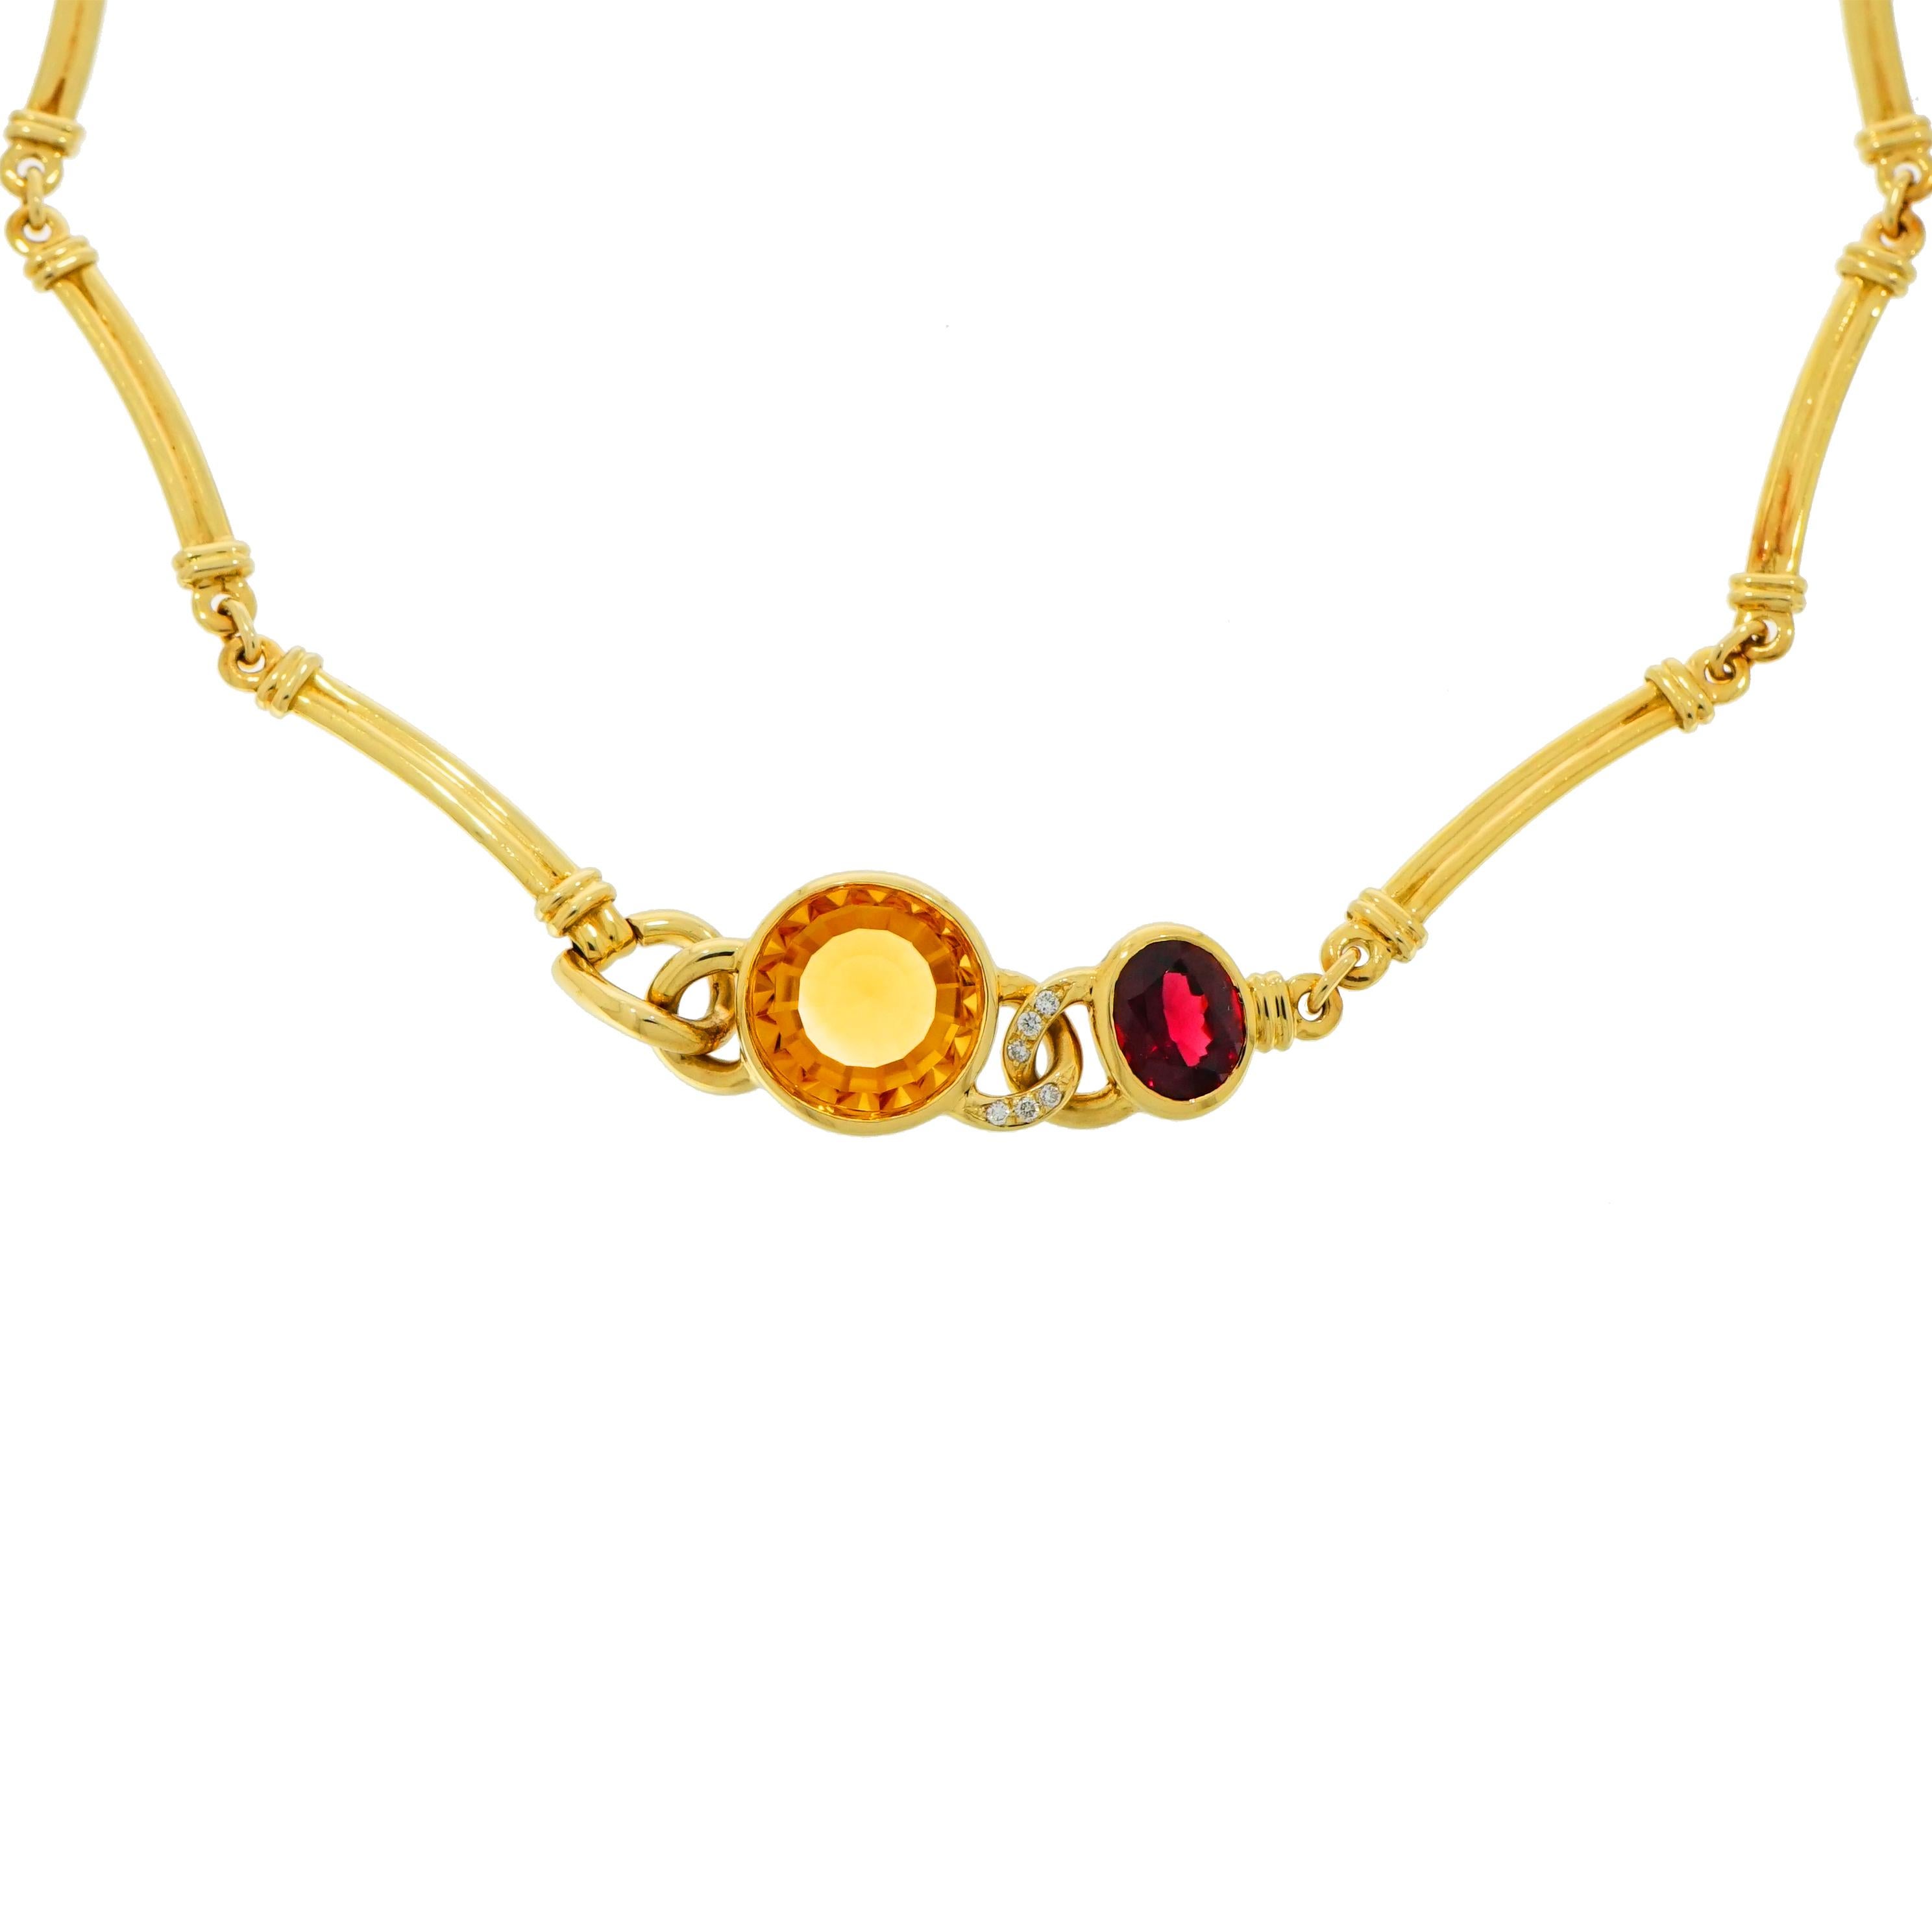 An exquisite Manfredi (Italy) design. Handcrafted in 18k Yellow Gold and featuring a Round Citrine and Oval Garnet with Diamond accent.
Signed by Manfredi.
Length of the necklace is 17 inches.